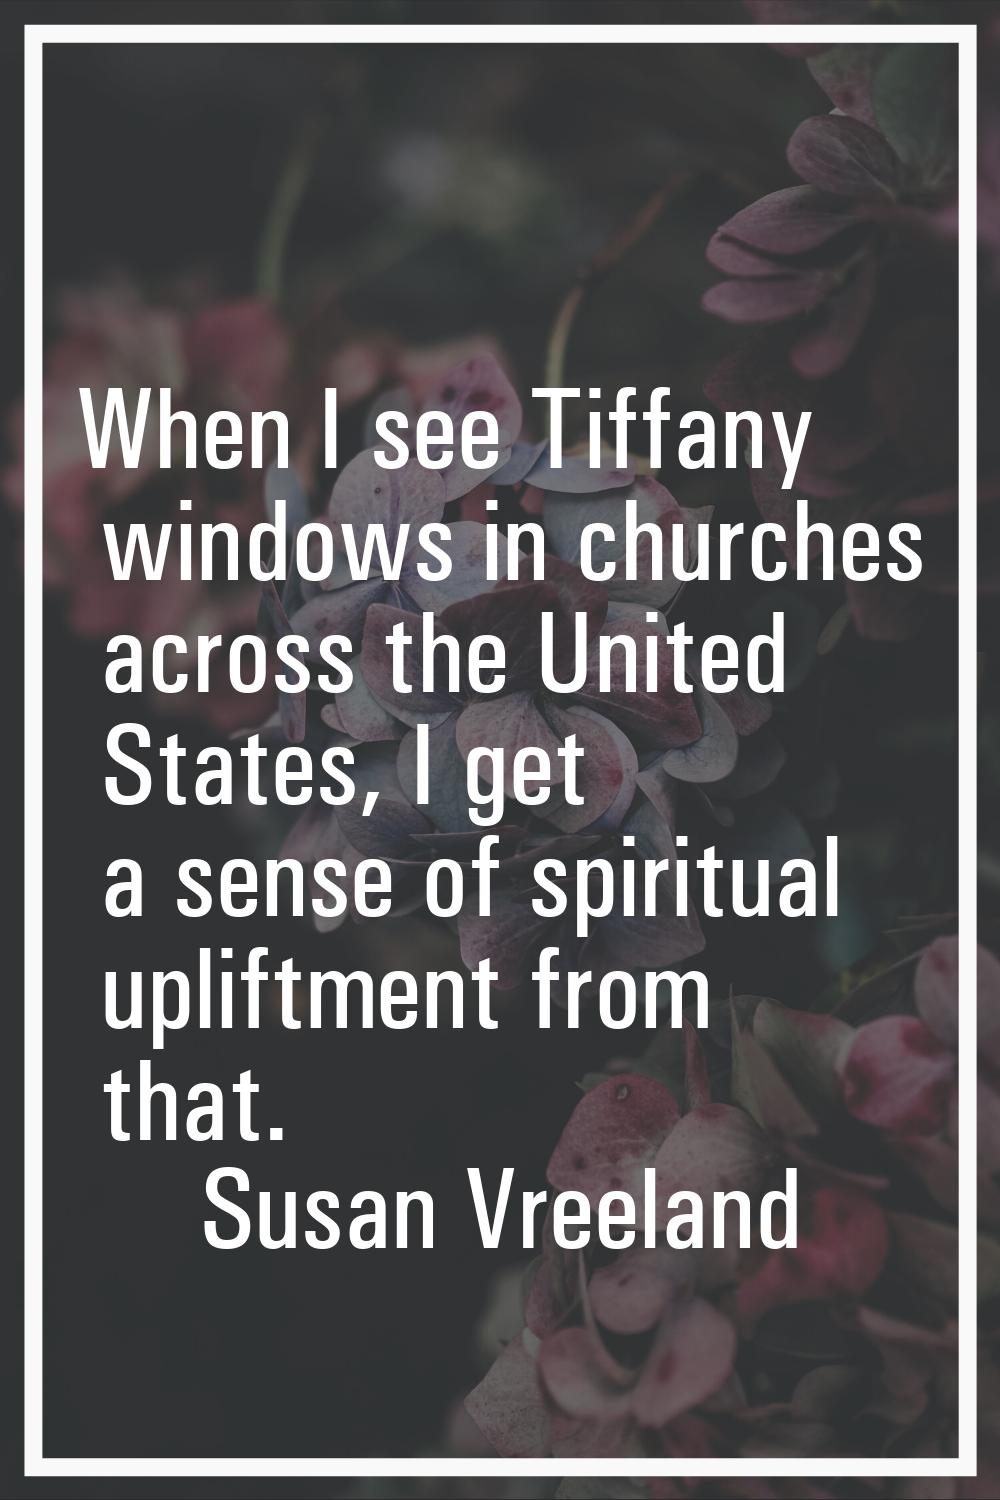 When I see Tiffany windows in churches across the United States, I get a sense of spiritual upliftm